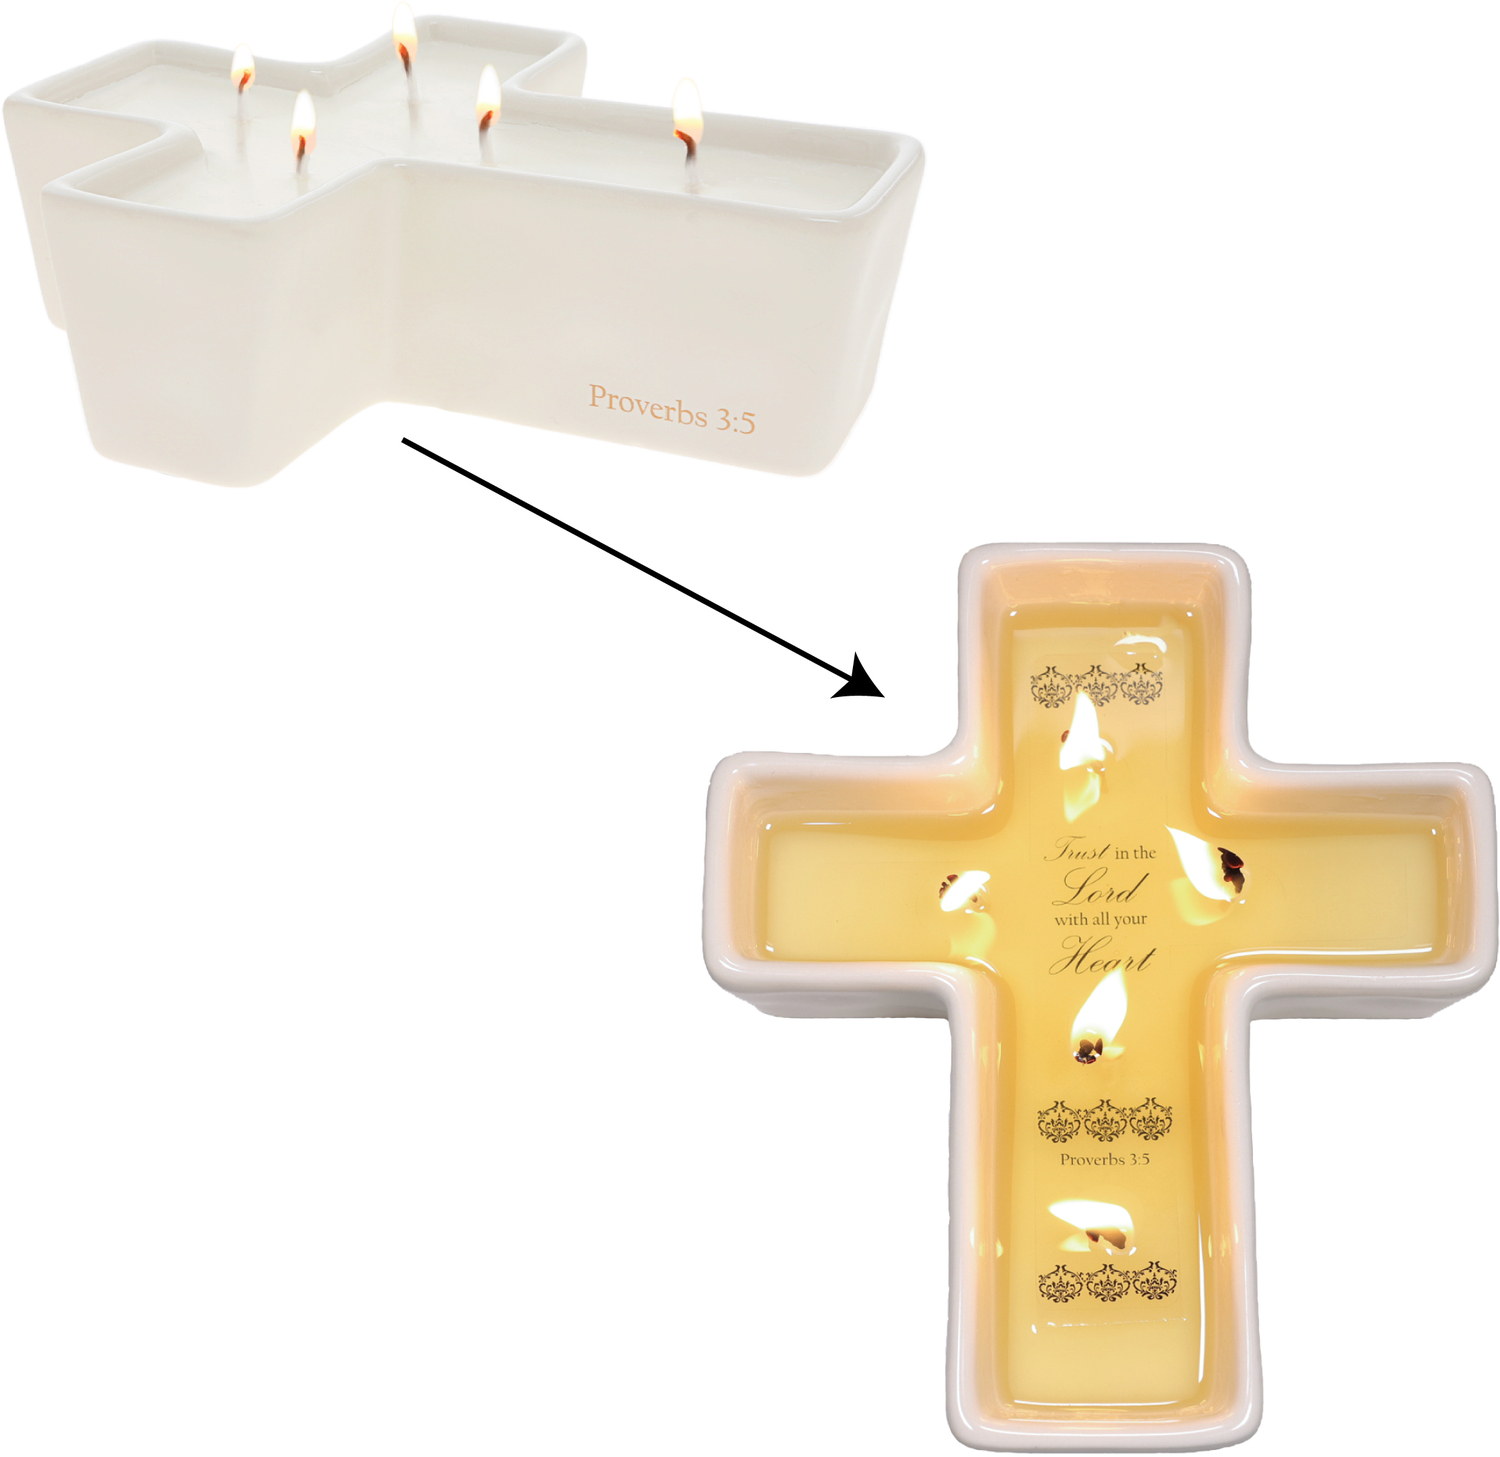 Trust in the Lord by Elements - Trust in the Lord - 12 oz - 100% Soy Wax Reveal 5 Wick Candle Scent: Tranquility